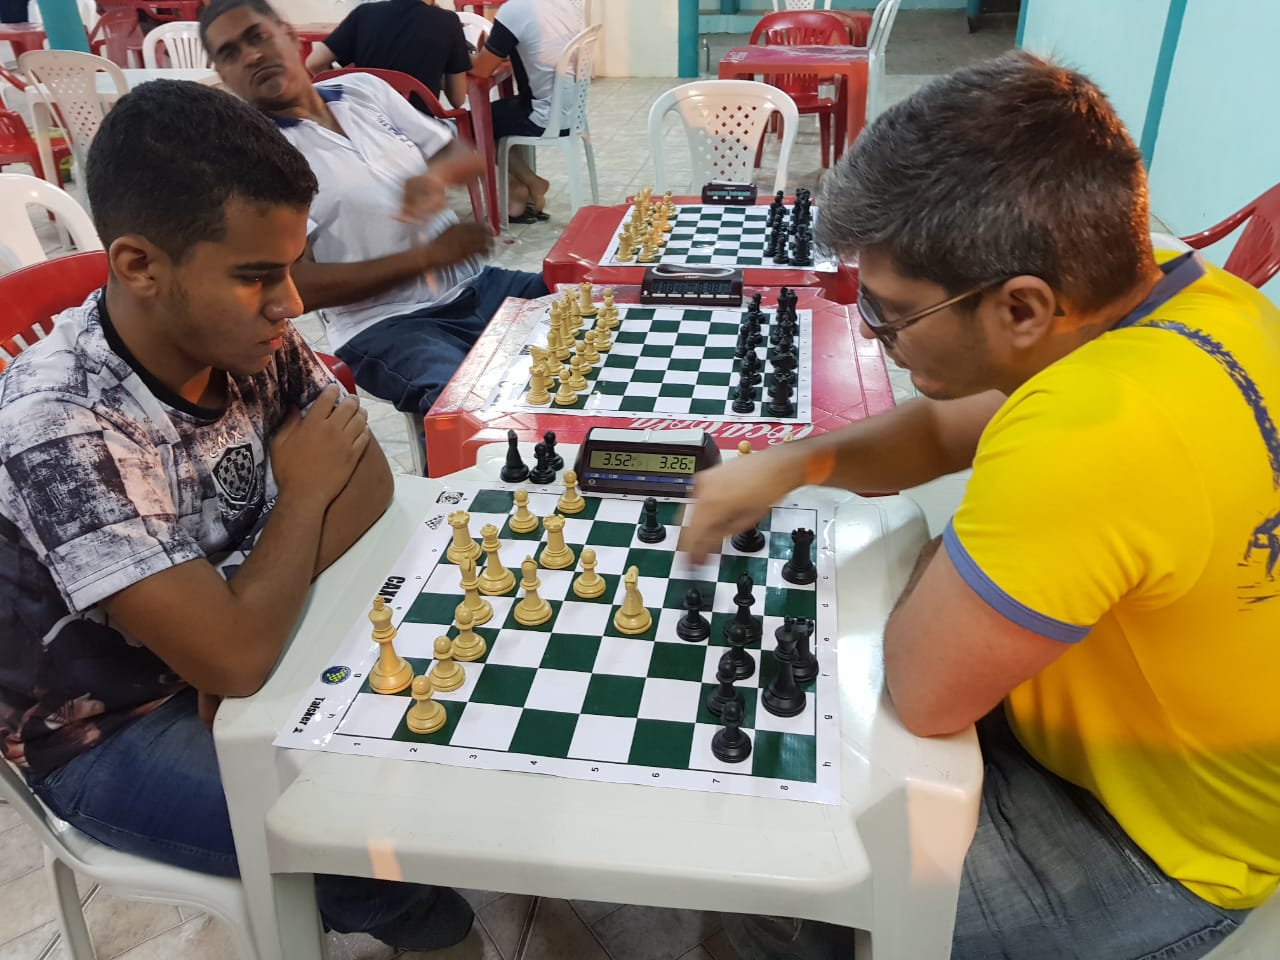 Talsker - Chess Tournaments, Games and Ratings